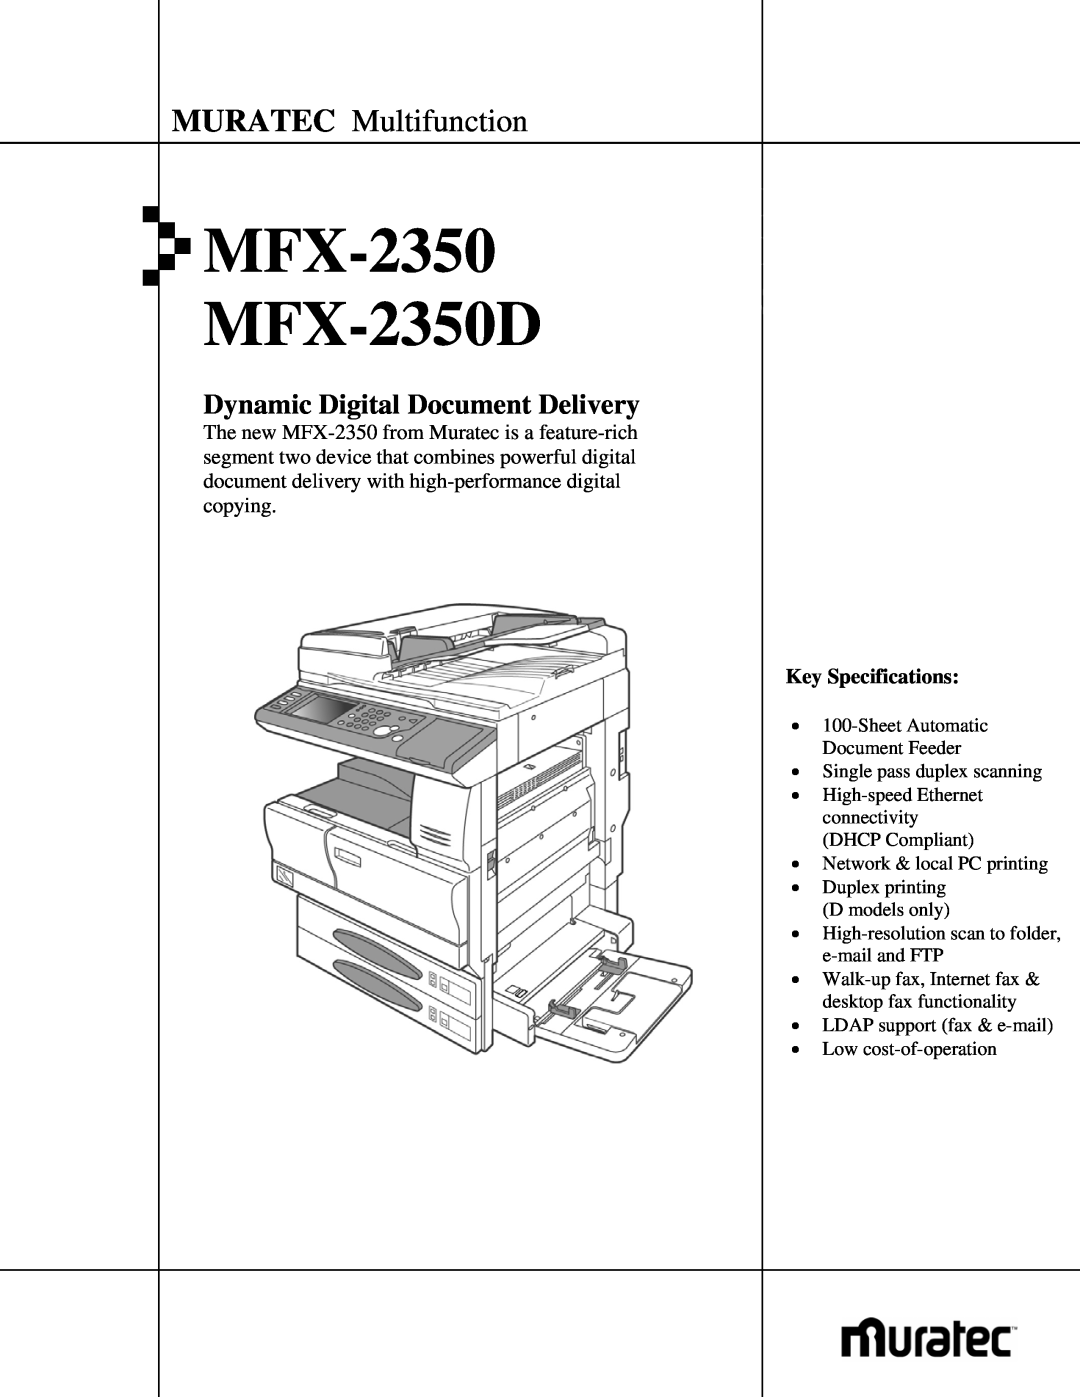 Muratec MFX-2350 D specifications Key Specifications, MFX-2350 MFX-2350D, Preliminary Product Sheet, MURATEC Multifunction 